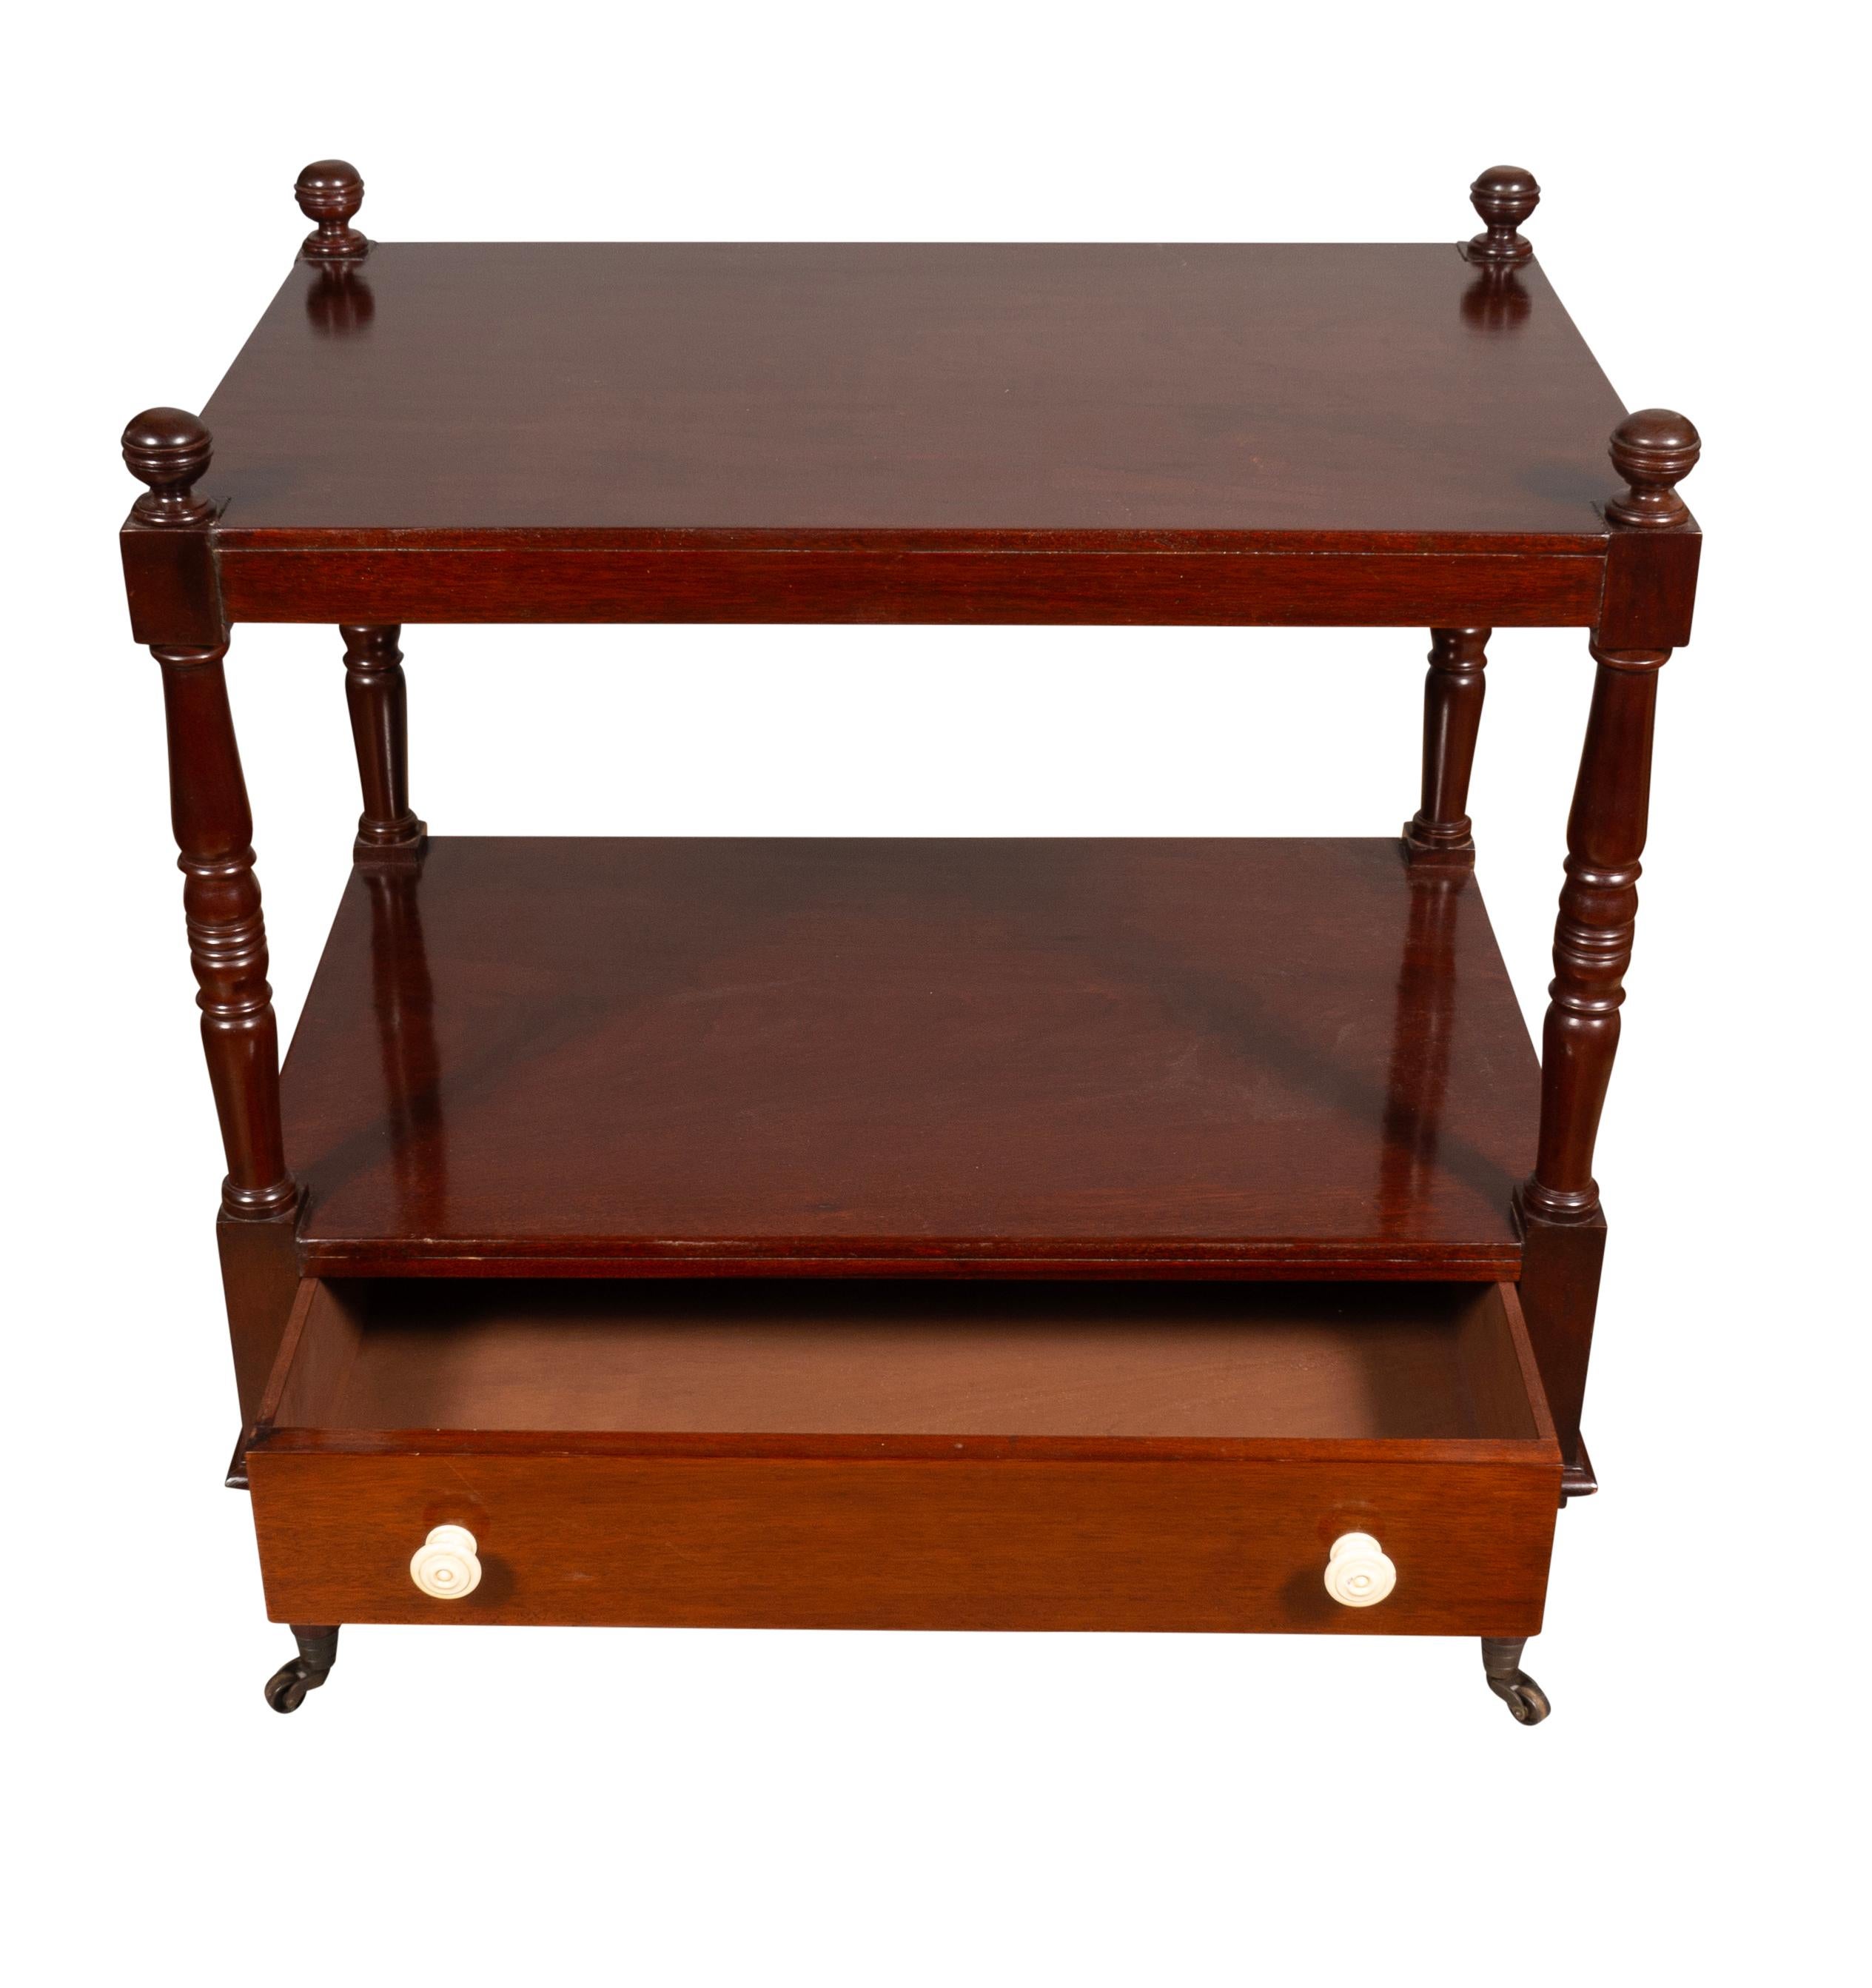 Matched Pair Of Regency Style Mahogany End Tables In Good Condition For Sale In Essex, MA